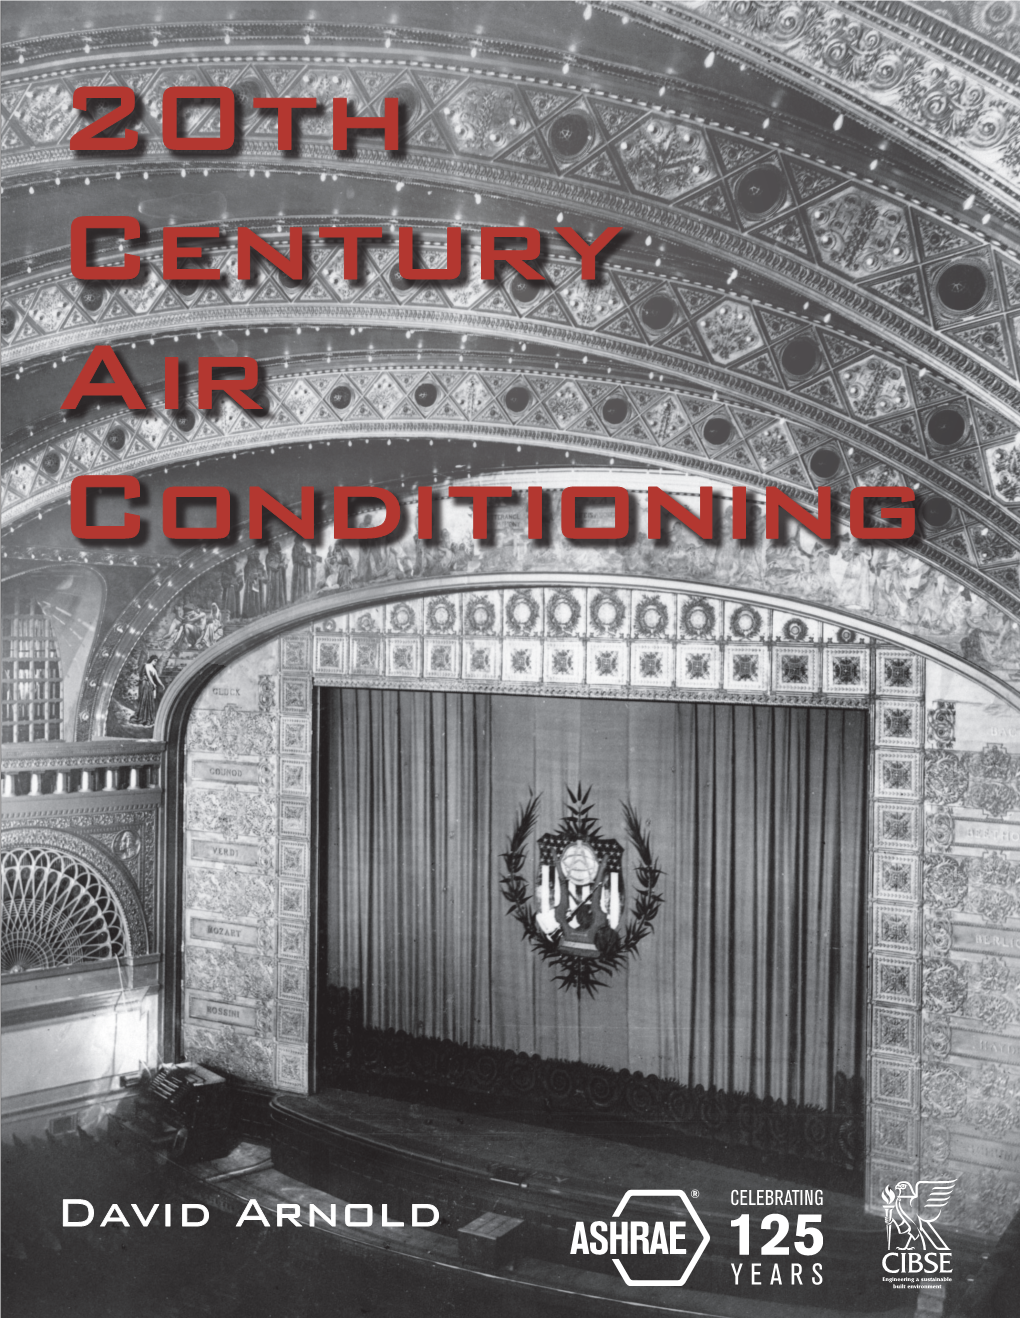 20Th Century Air Conditioning Transformed the 20Th Modern World Century Air Conditioning for Comfort in Buildings Developed Rapidly Over the 20Th Century